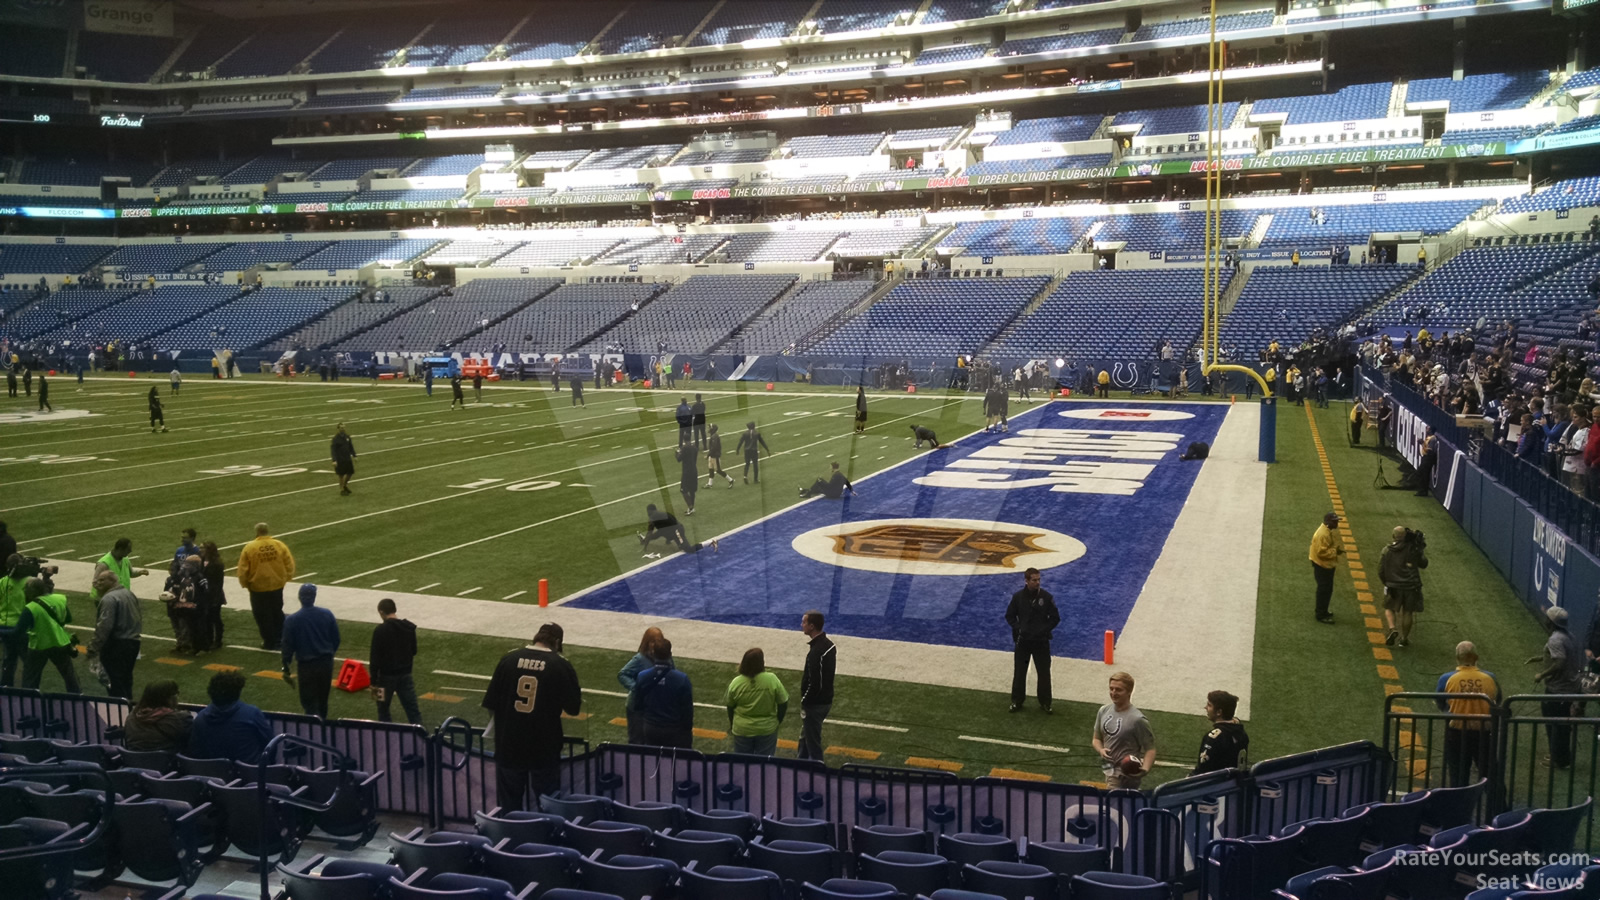 section 108, row 10 seat view  for football - lucas oil stadium